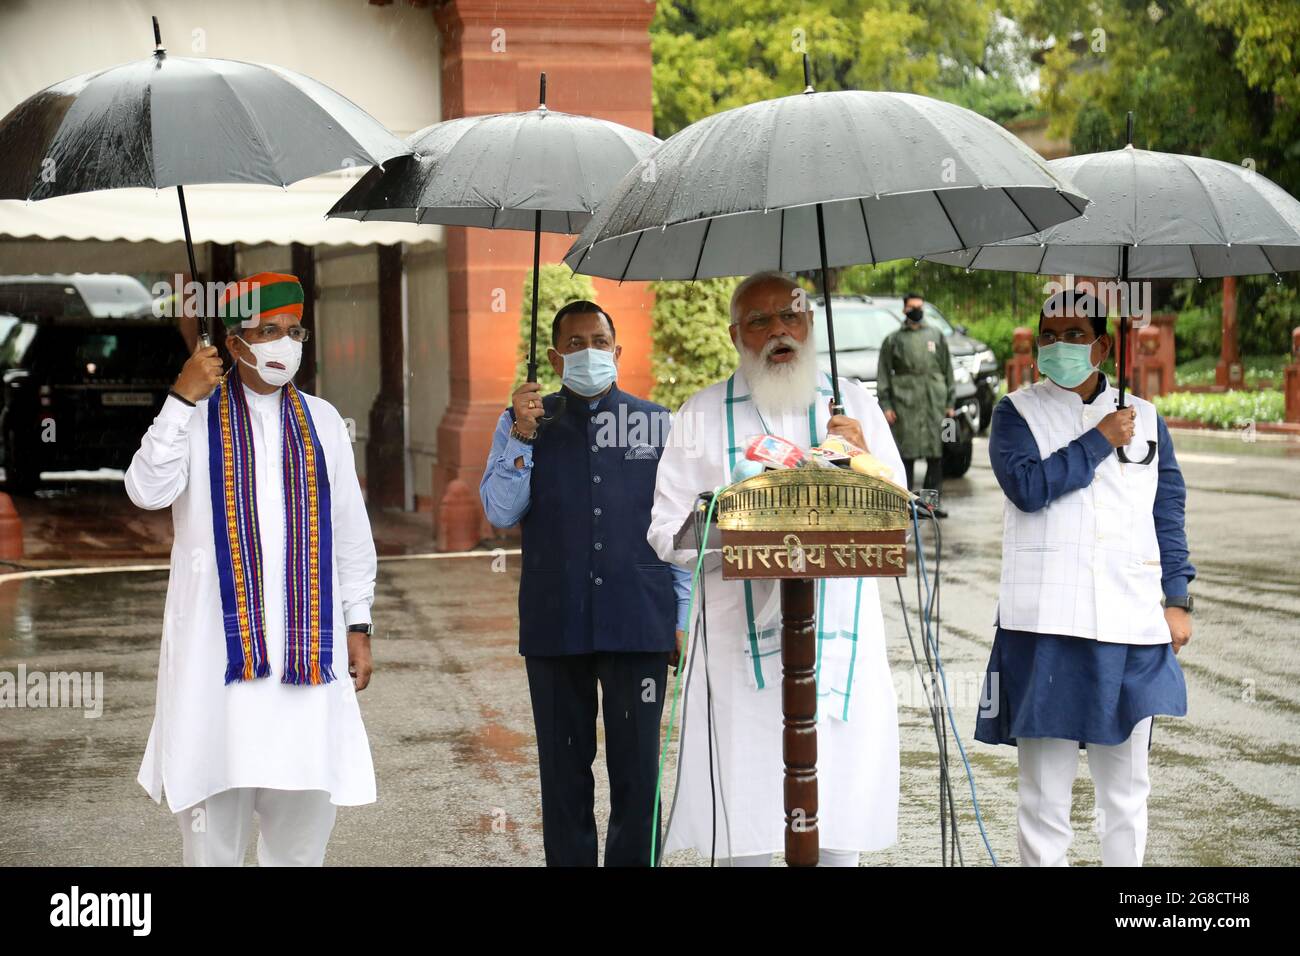 New Delhi, India. 19th July, 2021. Indian Prime Minister, Narendra Modi  holds an umbrella as he speaks to the media on the first day of the Monsoon  Session of Parliament 2021 at